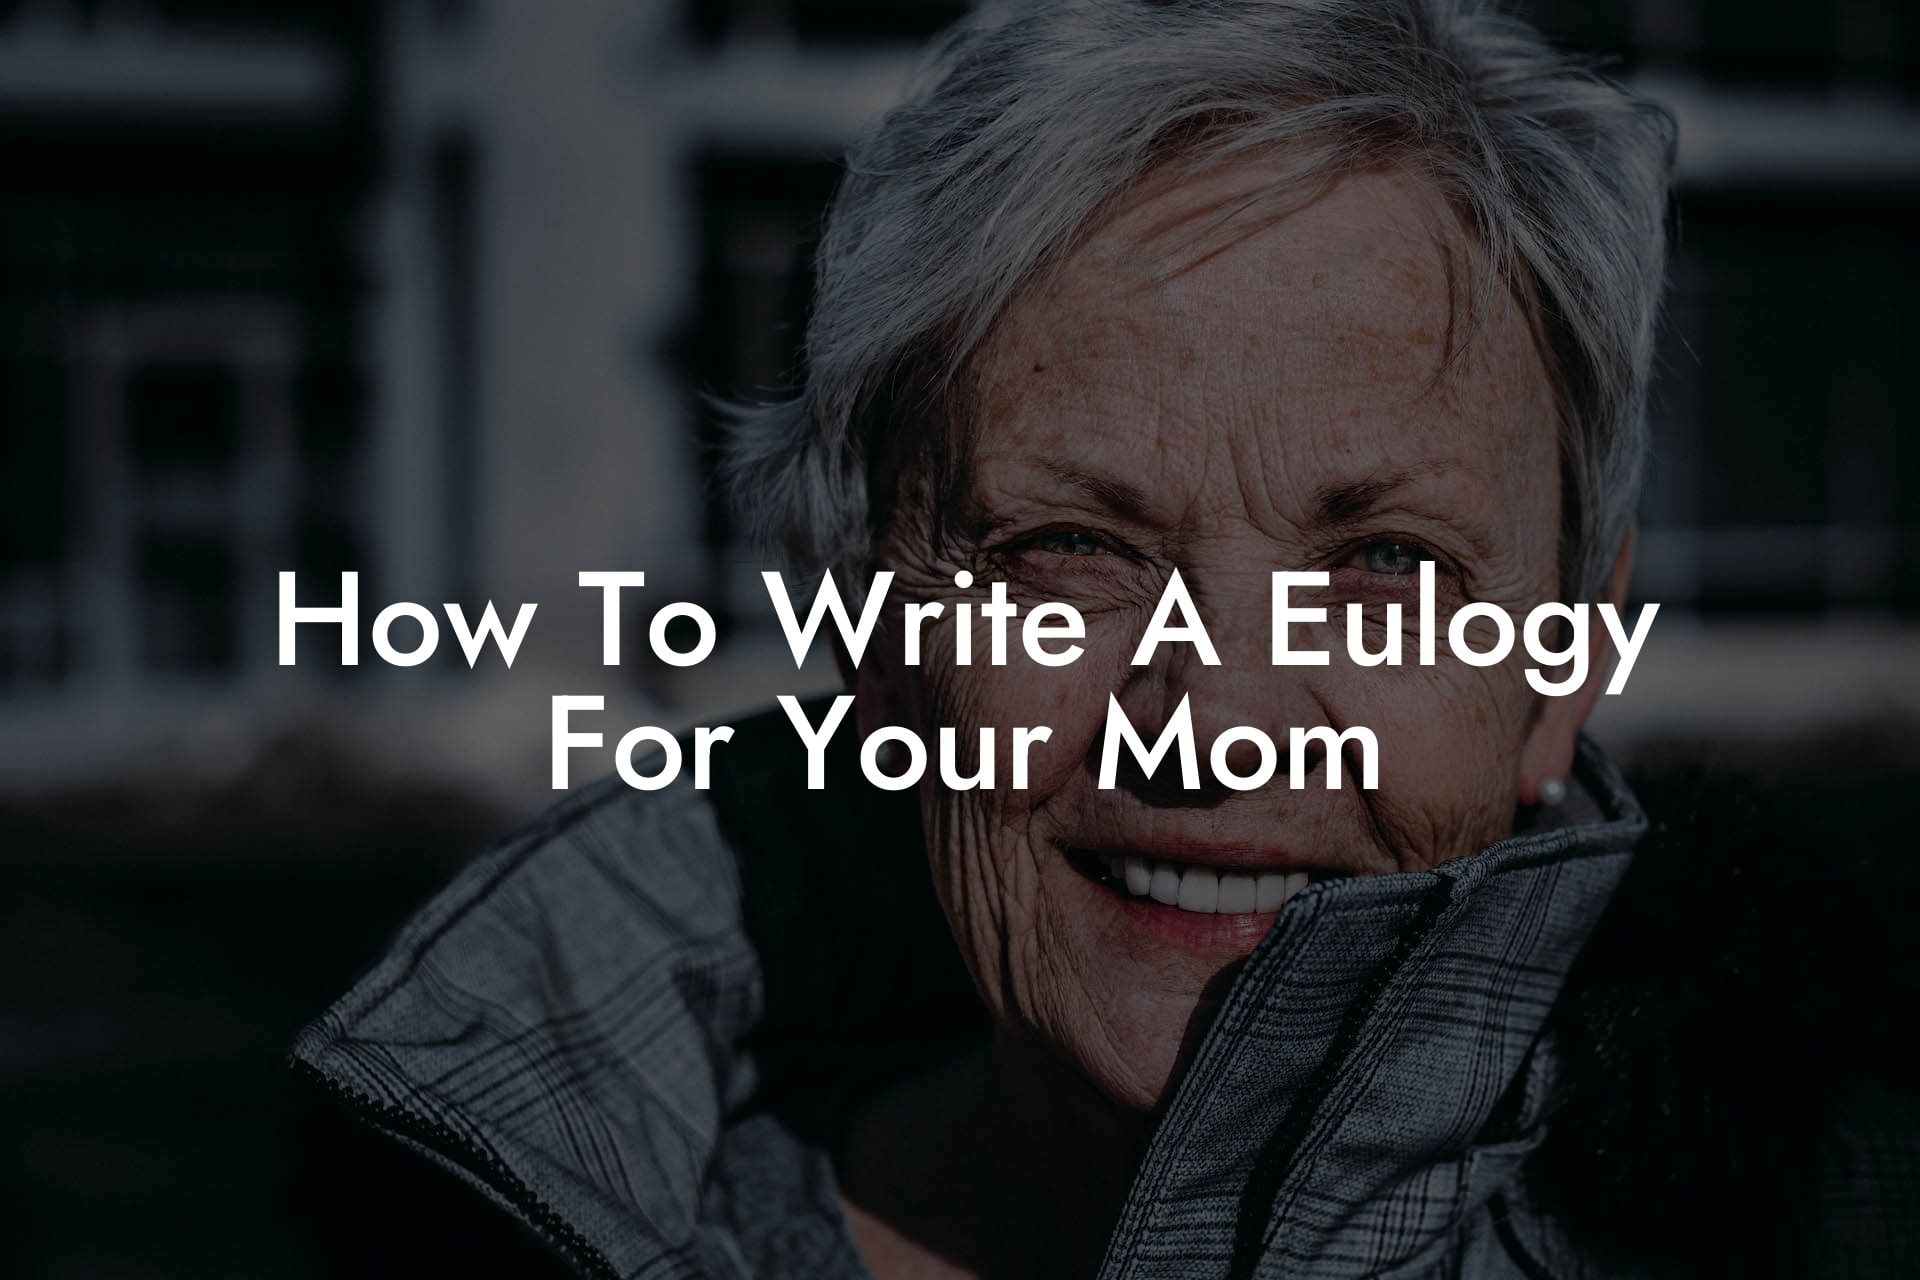 How To Write A Eulogy For Your Mom